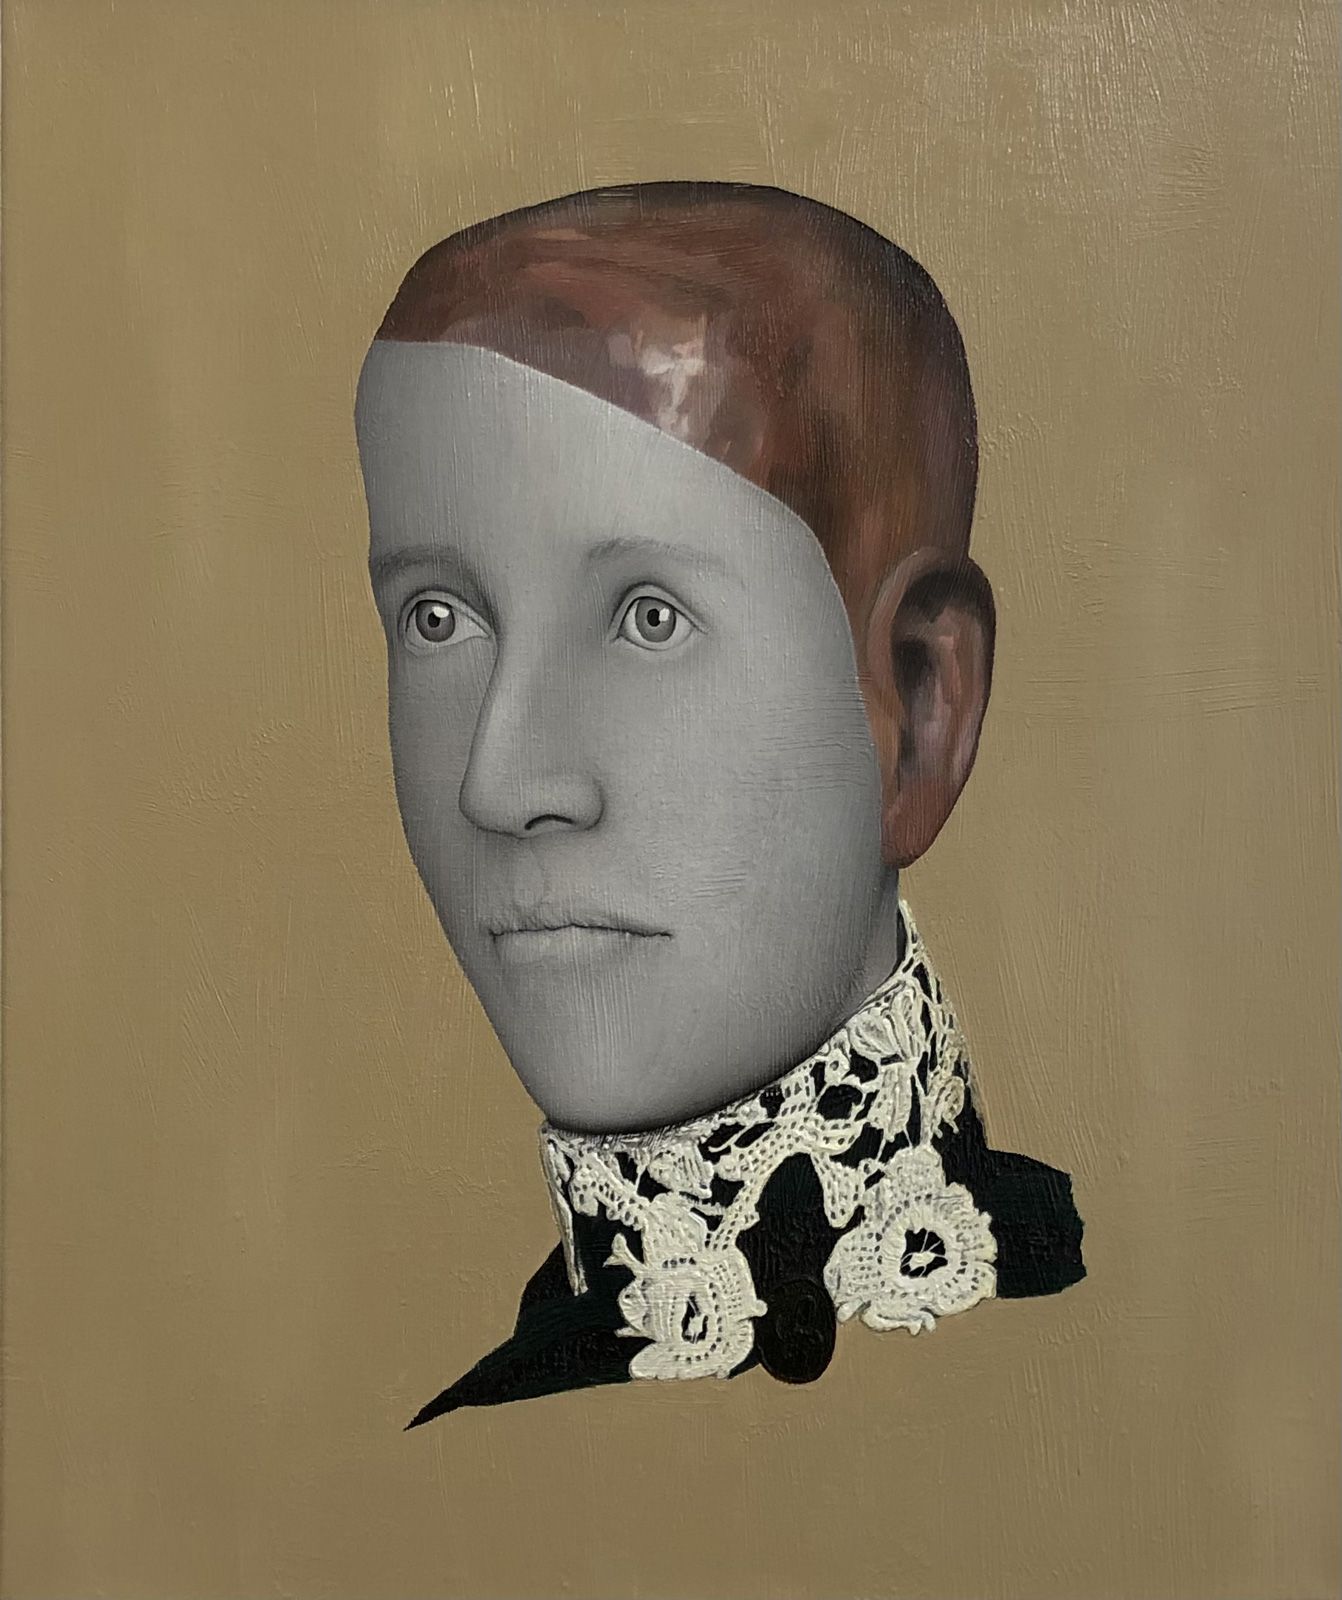 Mark Alexander's oil painting showcases a monochromatic face with a contrasting textured lace collar.